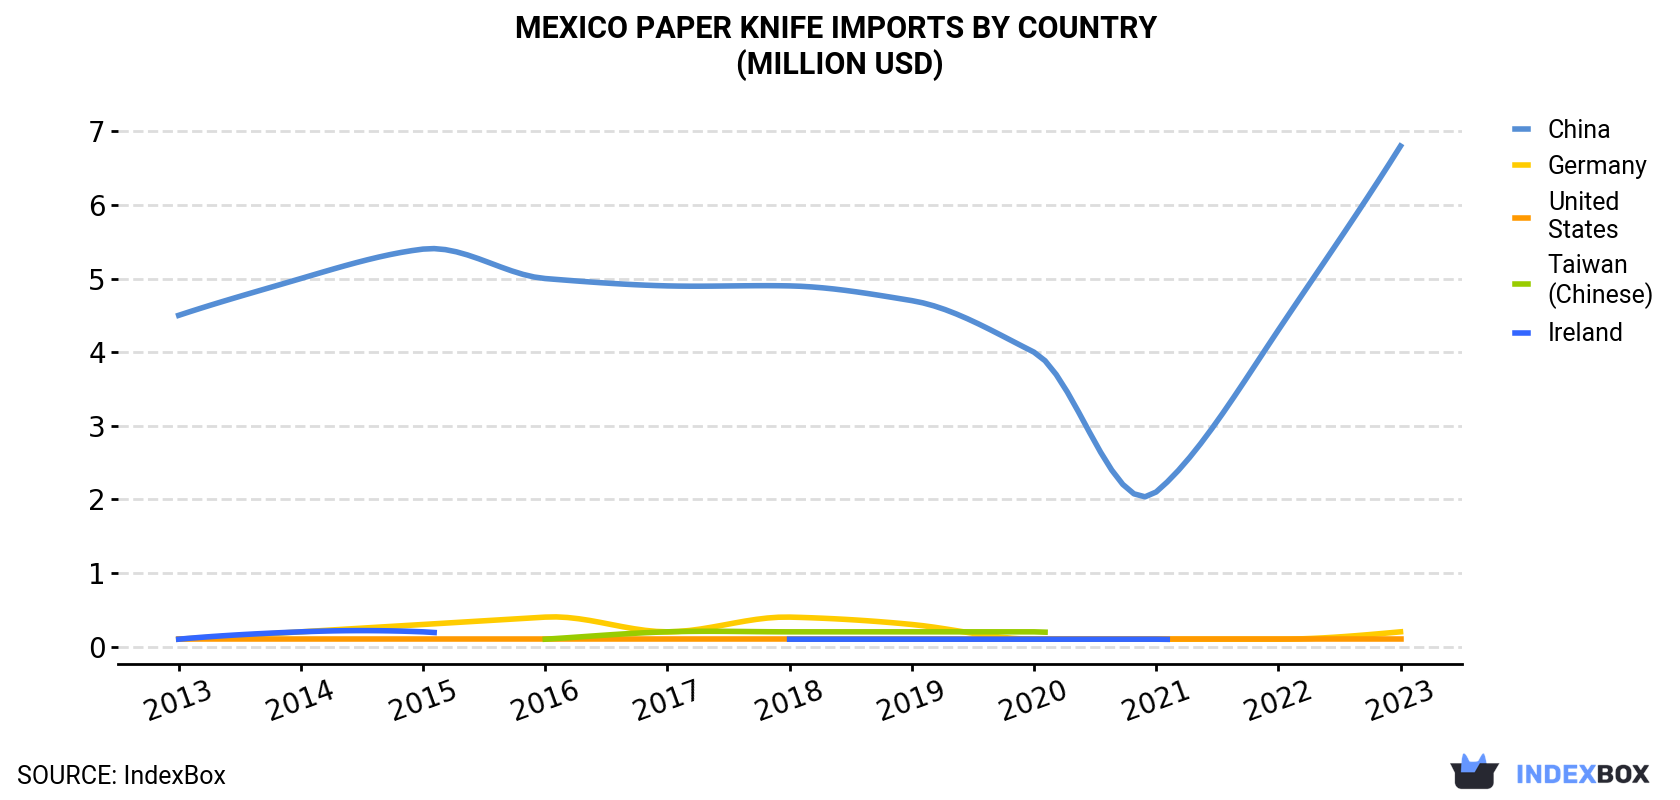 Mexico Paper Knife Imports By Country (Million USD)